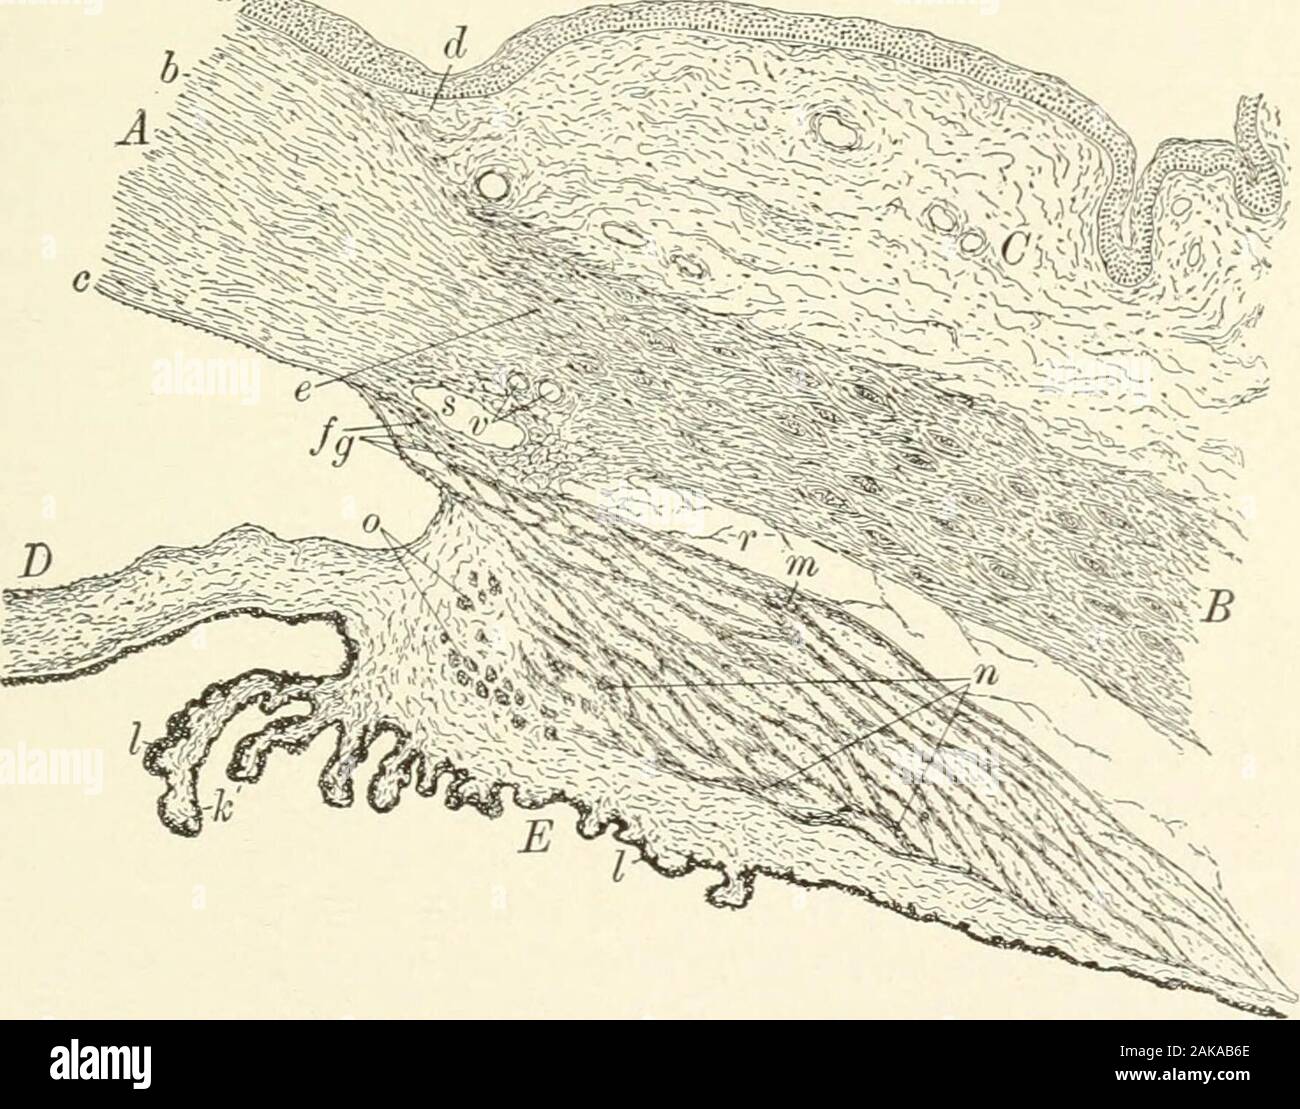 Textbook of normal histology: including an account of the development of the tissues and of the organs . sue ofprocesses. THE EYE AND ITS APPENDAGES. -,ac to the level of the underlying ciliary muscle. The stroma of theprocesses is a continuation of the connective tissue of the orbicularzone, this layer being the true prolongation of the choroid, since themuscular tissue must be regarded as an intercalation between thesclerotic and choroid coats. The vitreous lamina is continued as adelicate homogenous membrane, 3 to 4 fi in thickness, over the innersurface of the ciliary processes. Inside thi Stock Photo